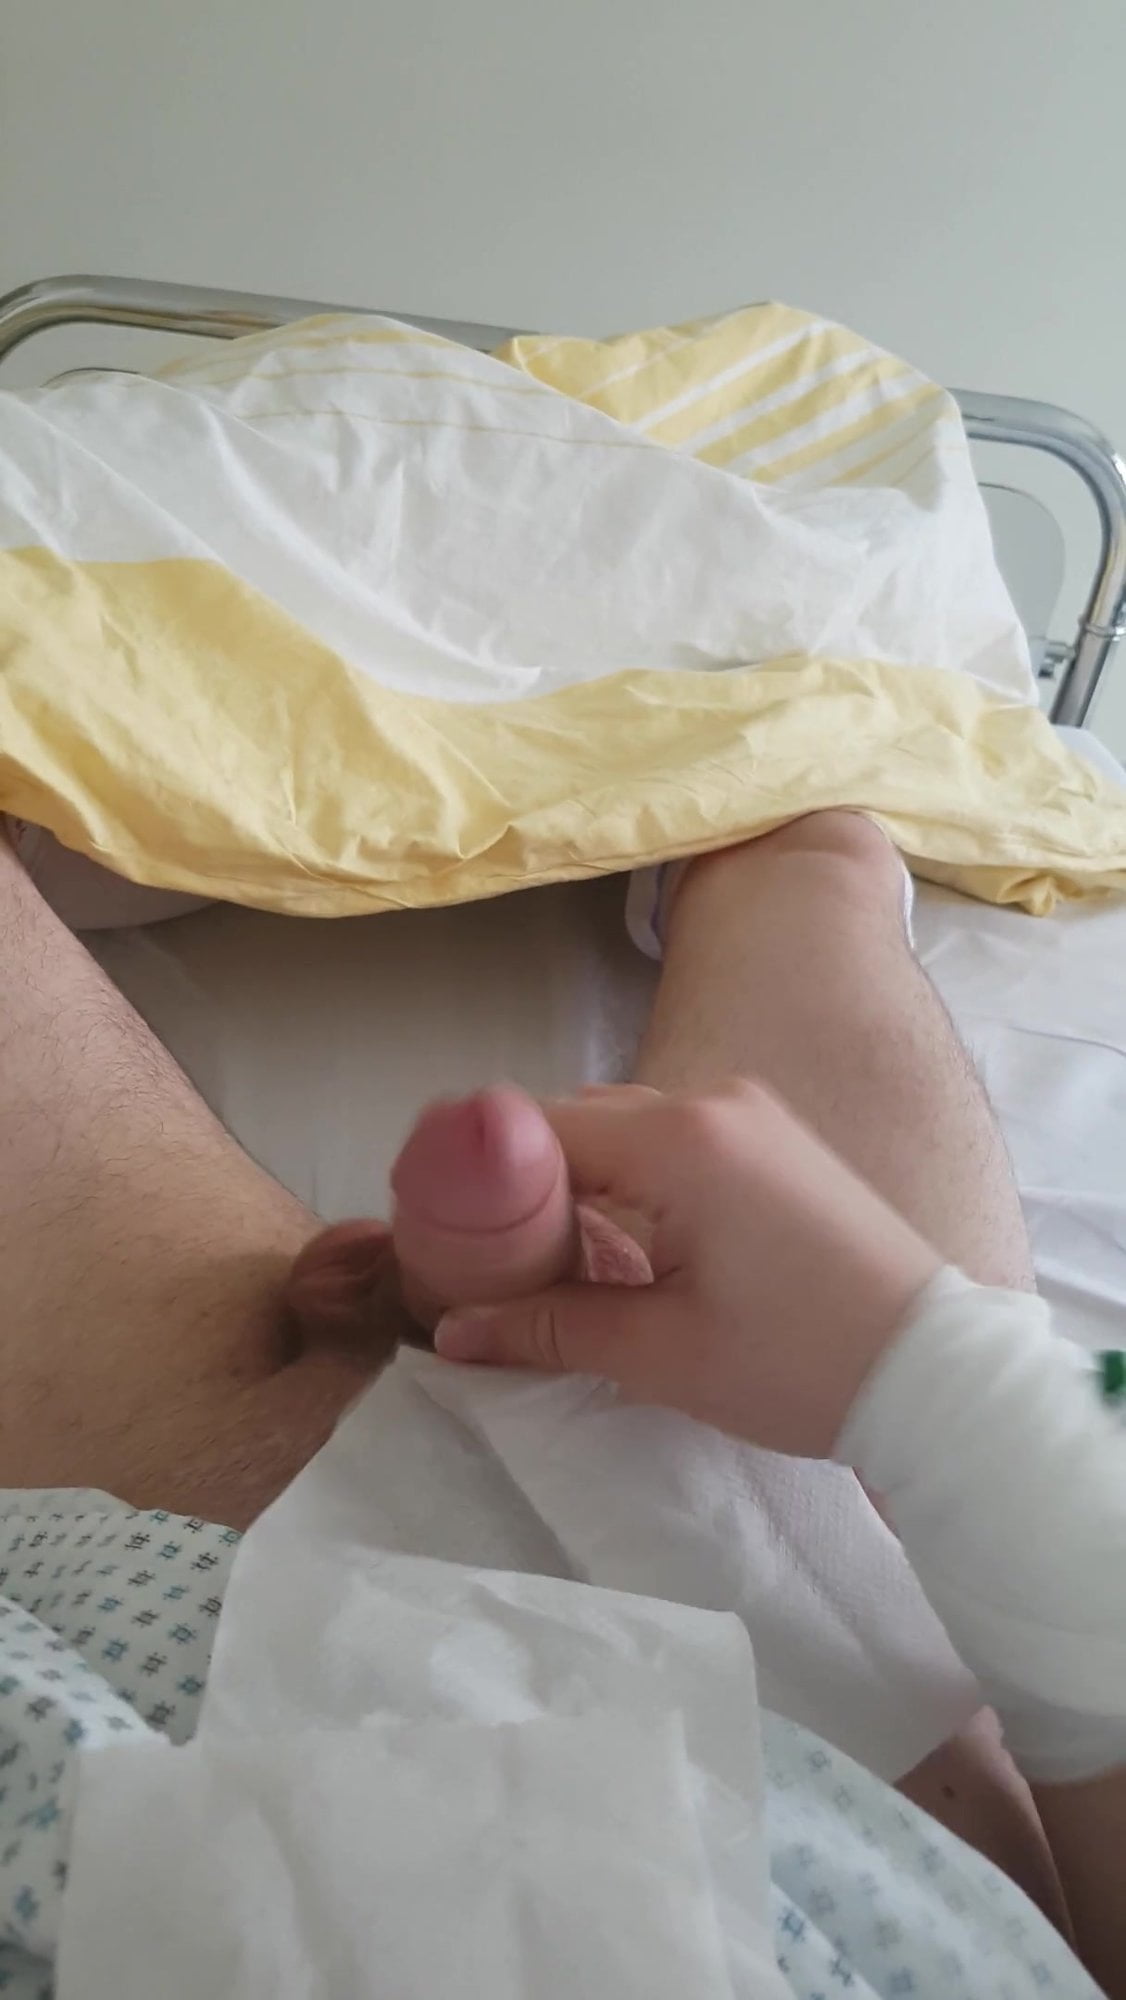 wank in the hospital bed